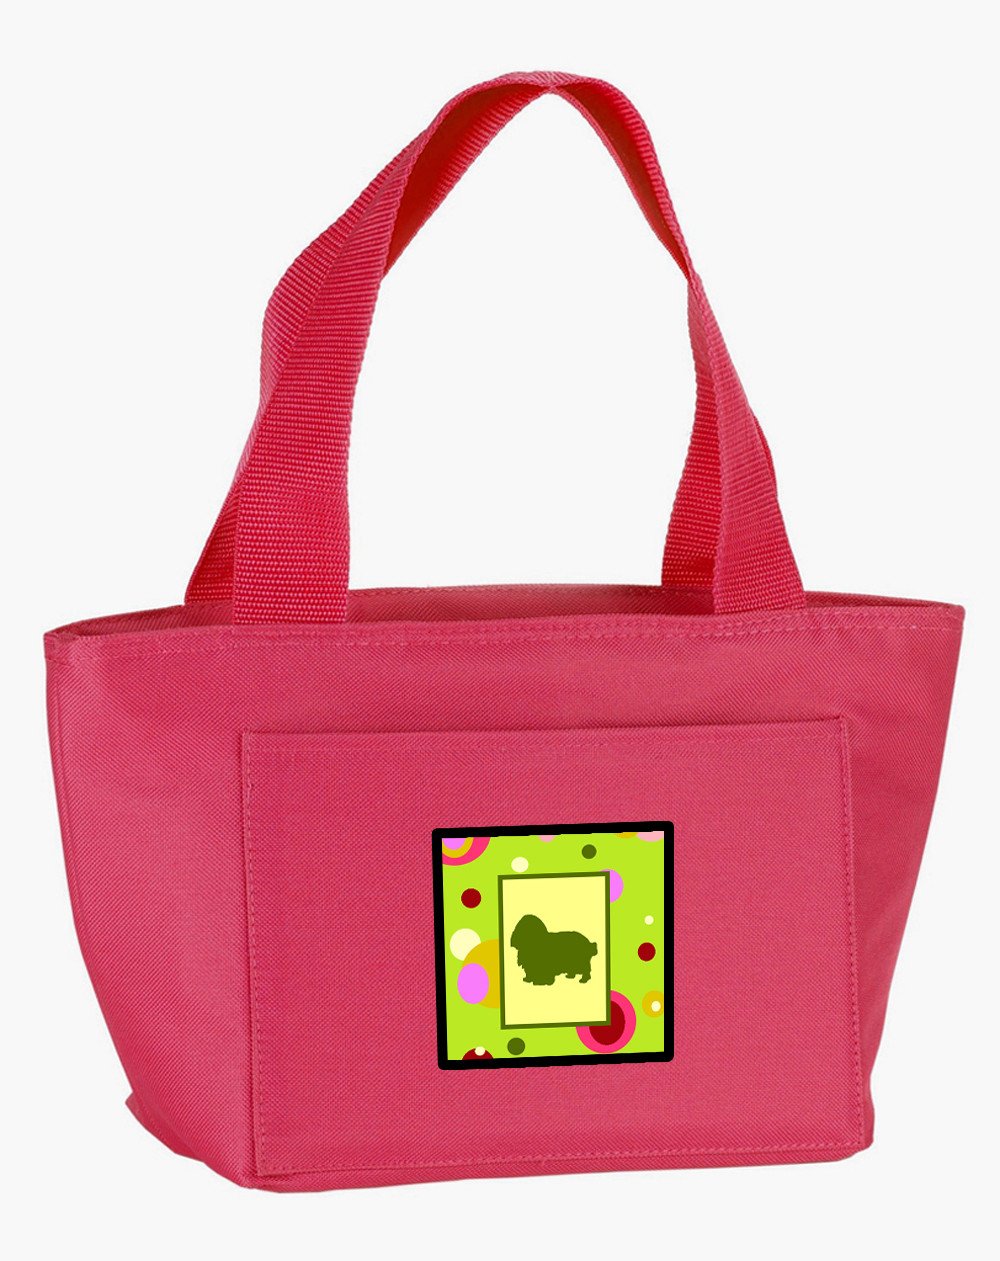 Lime Green Dots English Toy Spaniel Lunch Bag CK1100PK-8808 by Caroline's Treasures